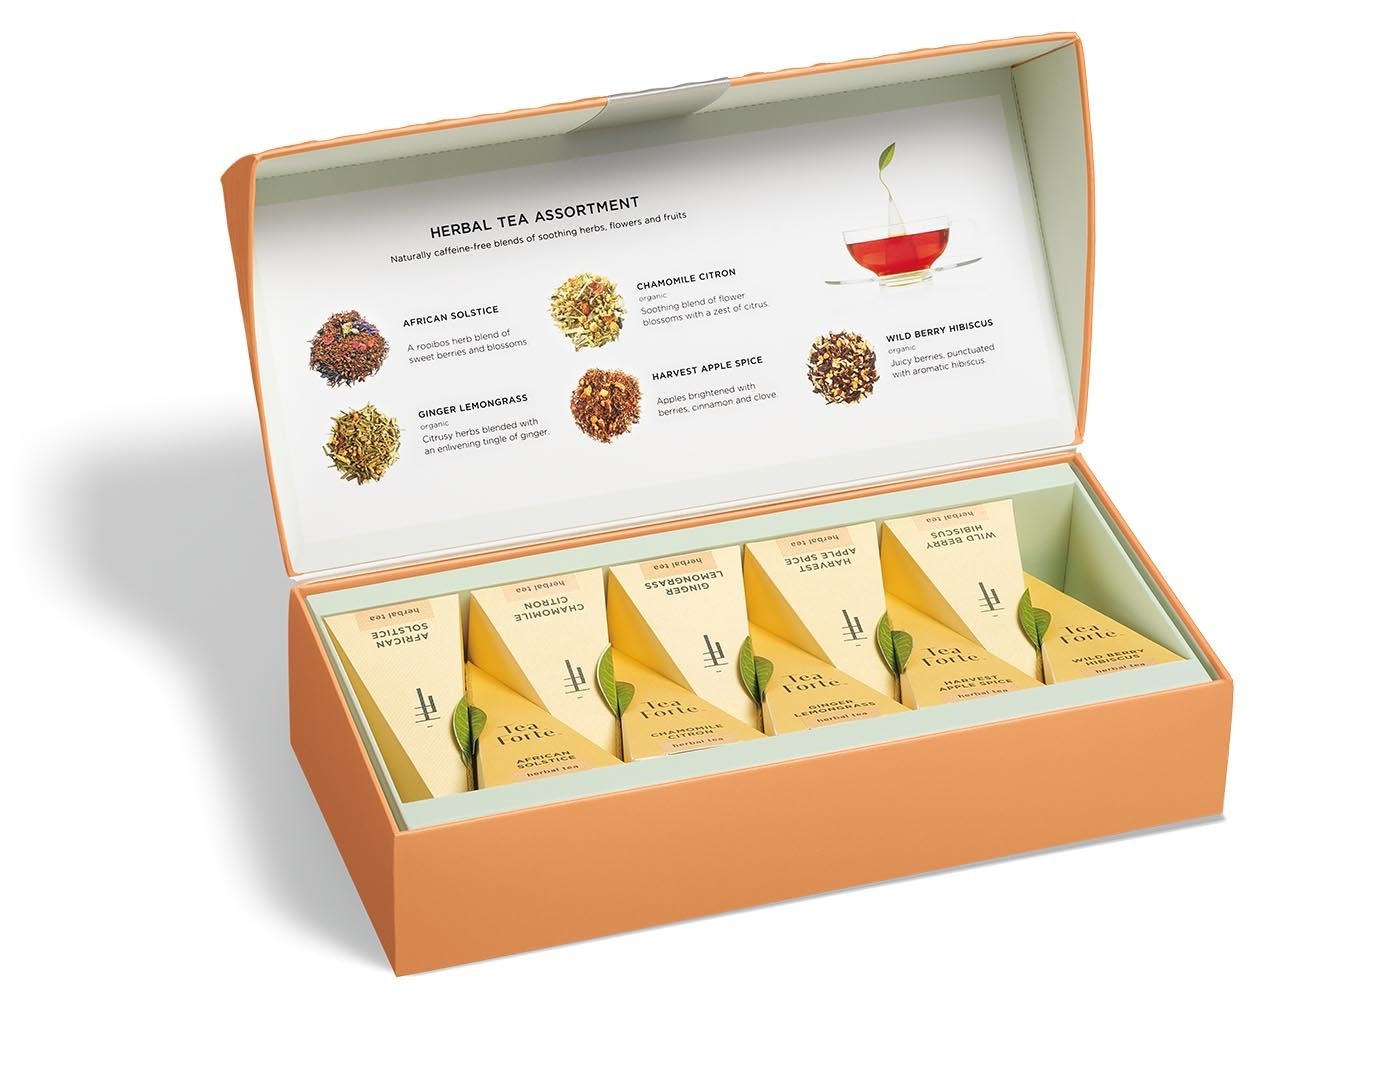 Herbal tea assortment in a 10 count petite presentation box with lid open